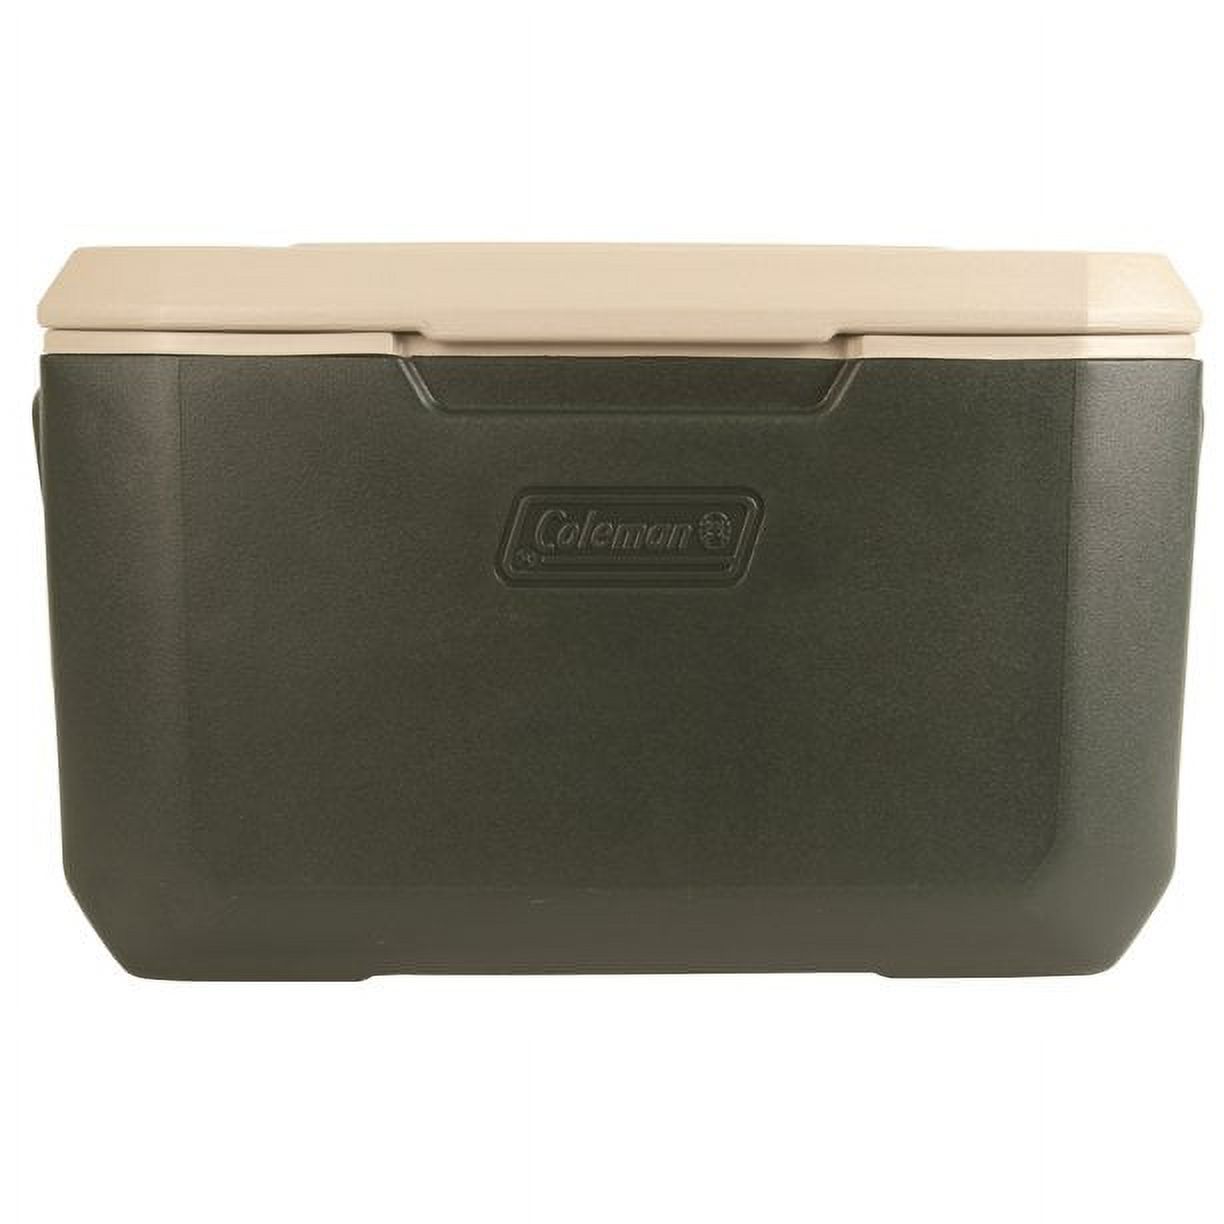 Coleman 70 Quart Xtreme 5 Day Heavy Duty Cooler, Green - image 2 of 6